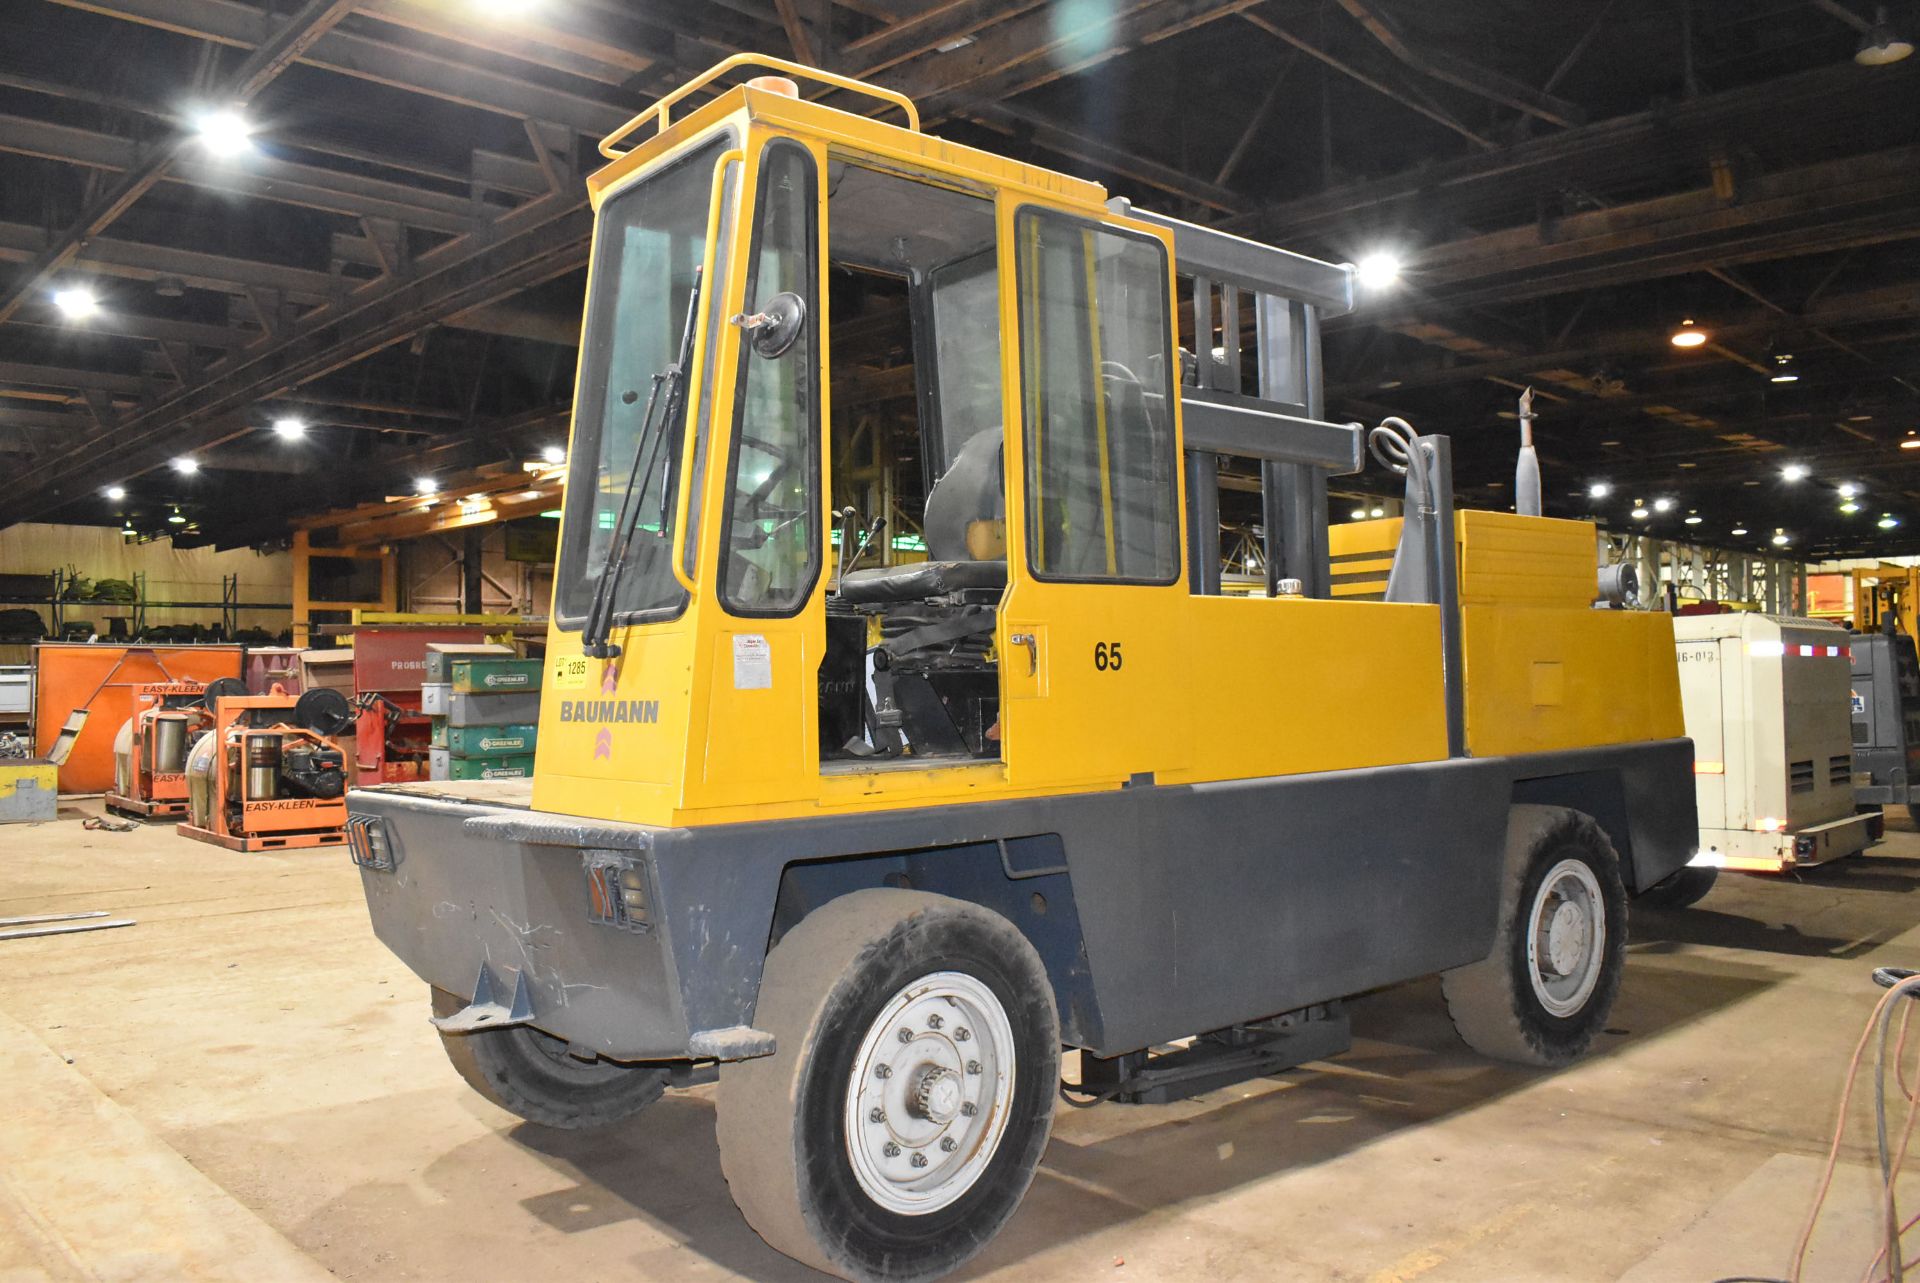 BAUMANN AS60/12/40 13,600 LB. CAPACITY DIESEL SIDE LOADER FORKLIFT WITH 60" MAX. LIFT HEIGHT, SINGLE - Image 8 of 17